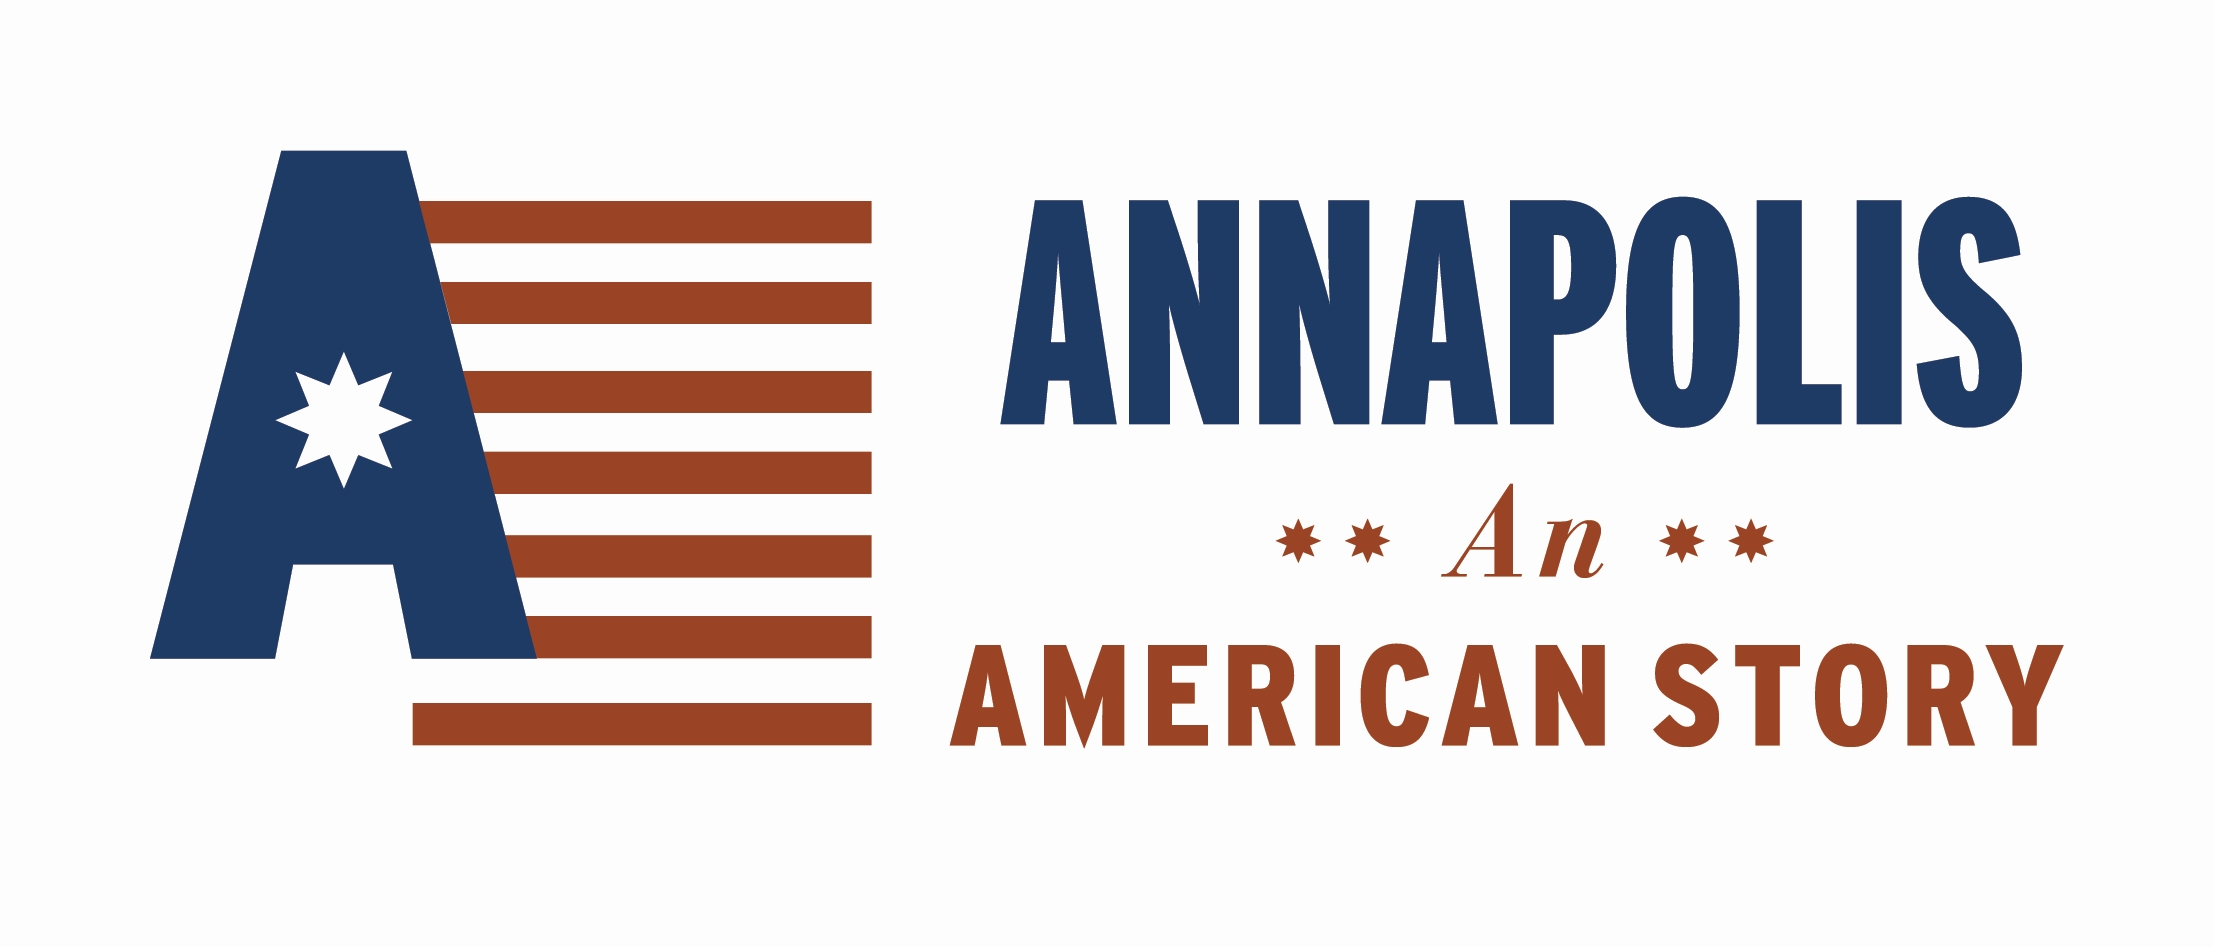 Annapolis: An American Story